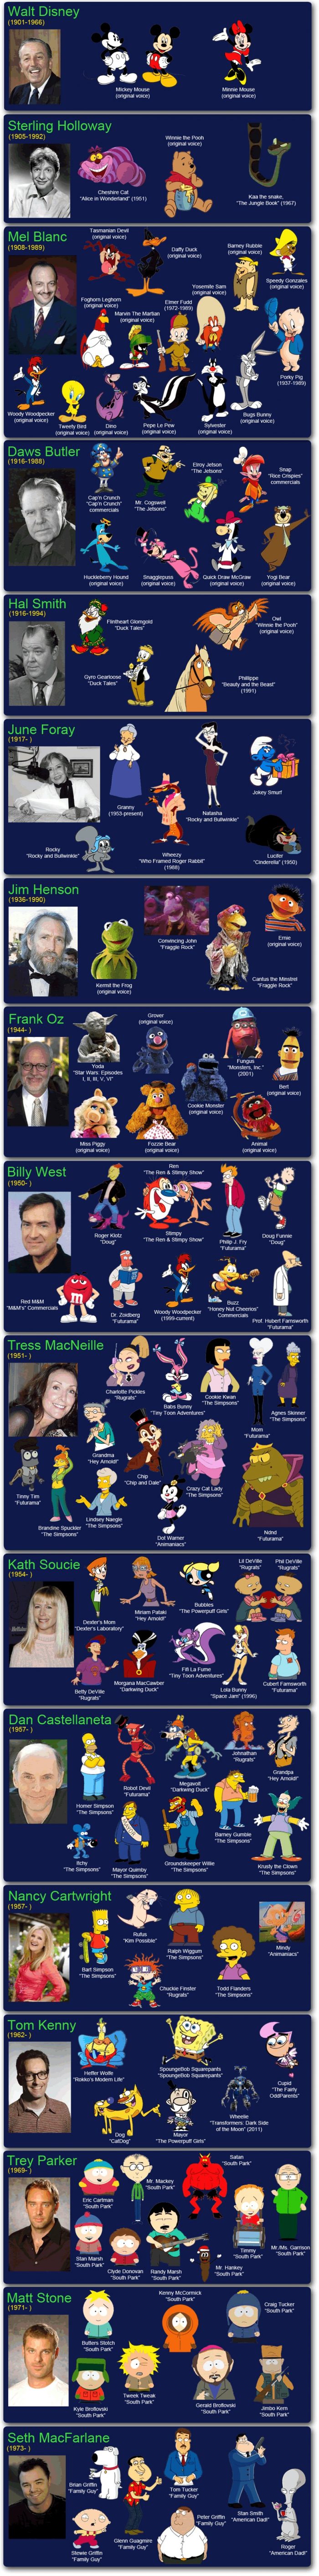 The Famous Voice Actors & Actresses Behind Your Favorite Cartoons